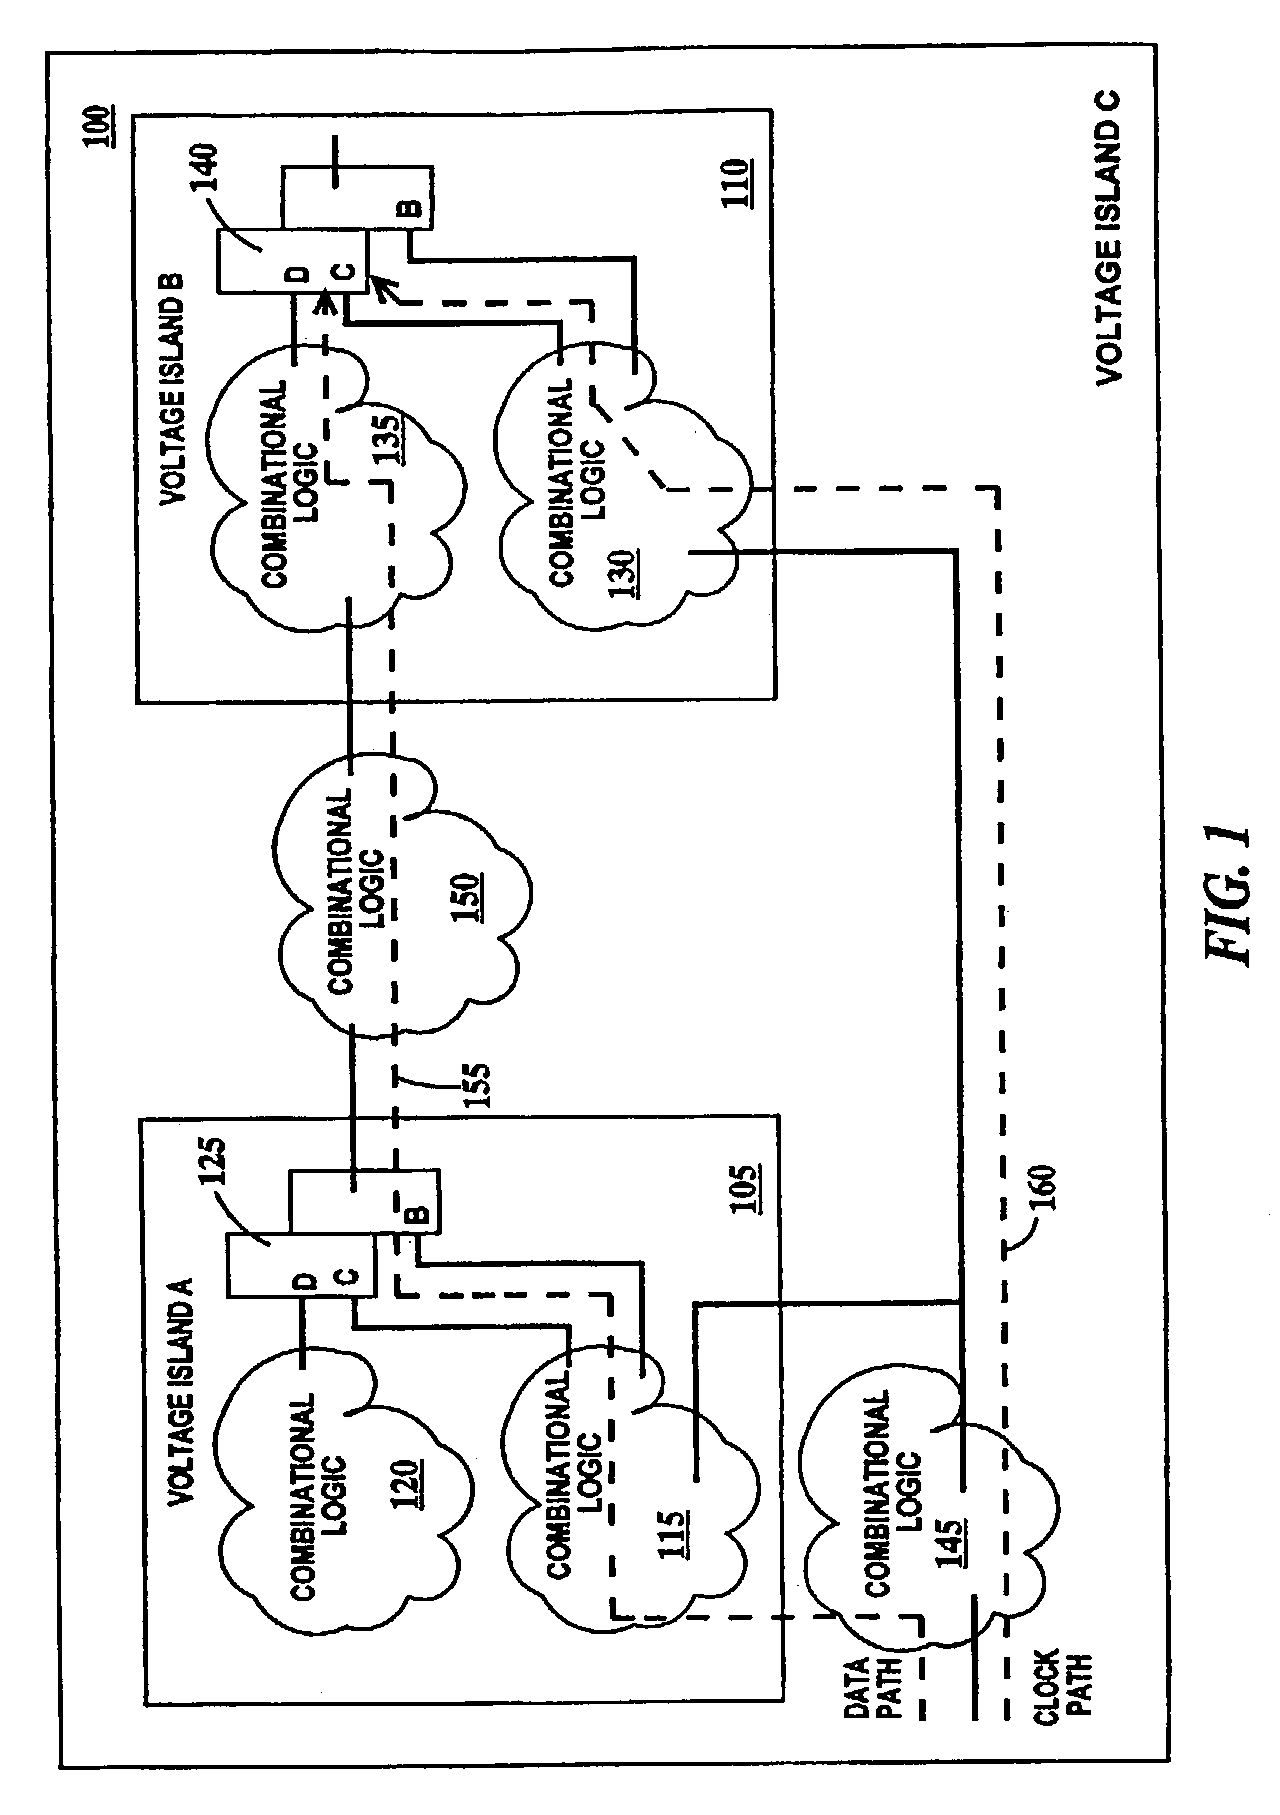 Method for static timing verification of integrated circuits having voltage islands